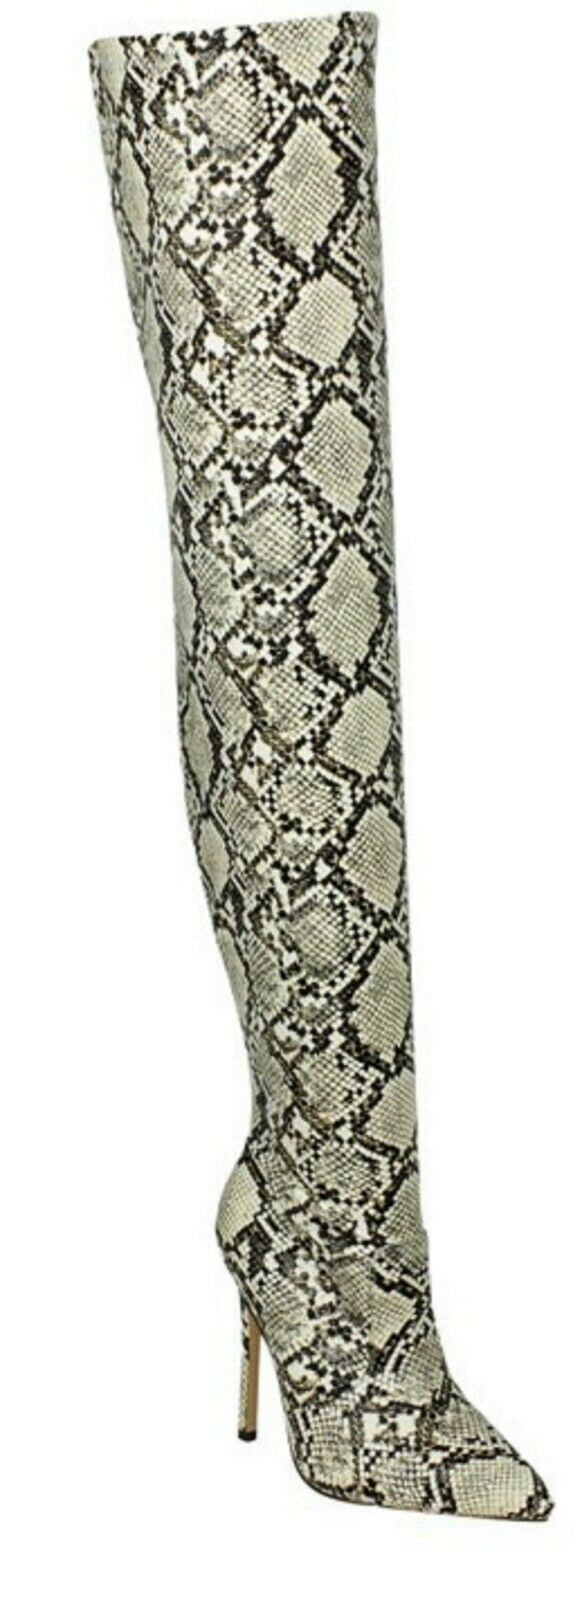 Snakeskin Print Pointed Thigh High Over The Knee Women Boots Tall Shoes Stiletto